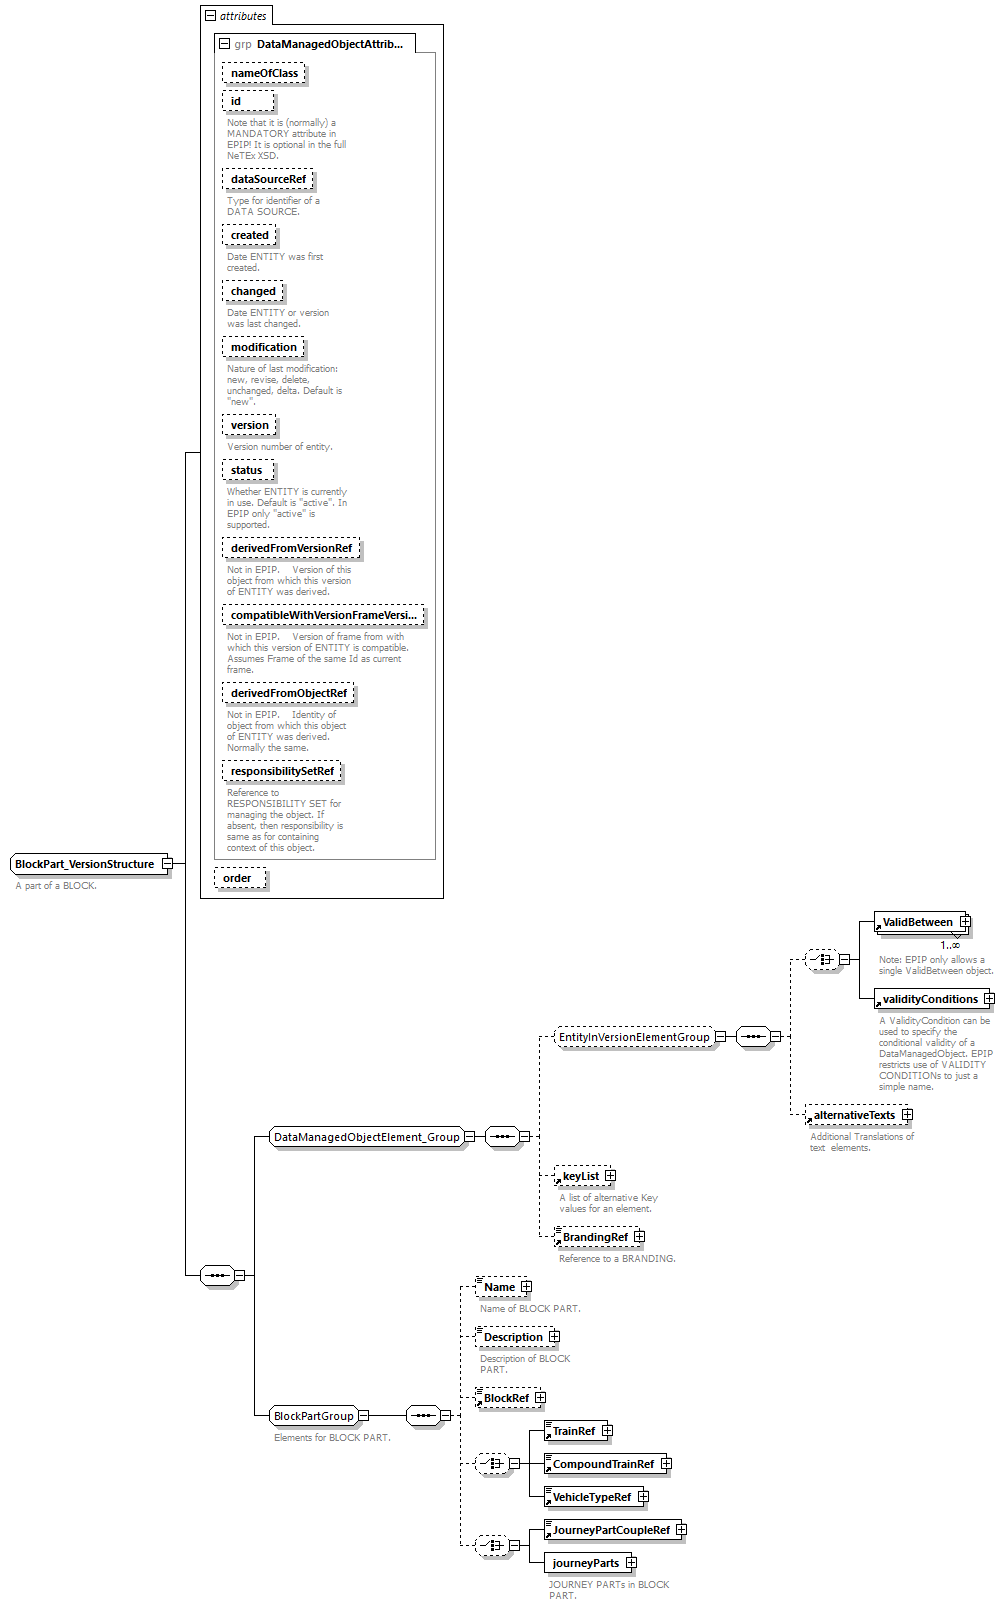 reduced_diagrams/reduced_p991.png